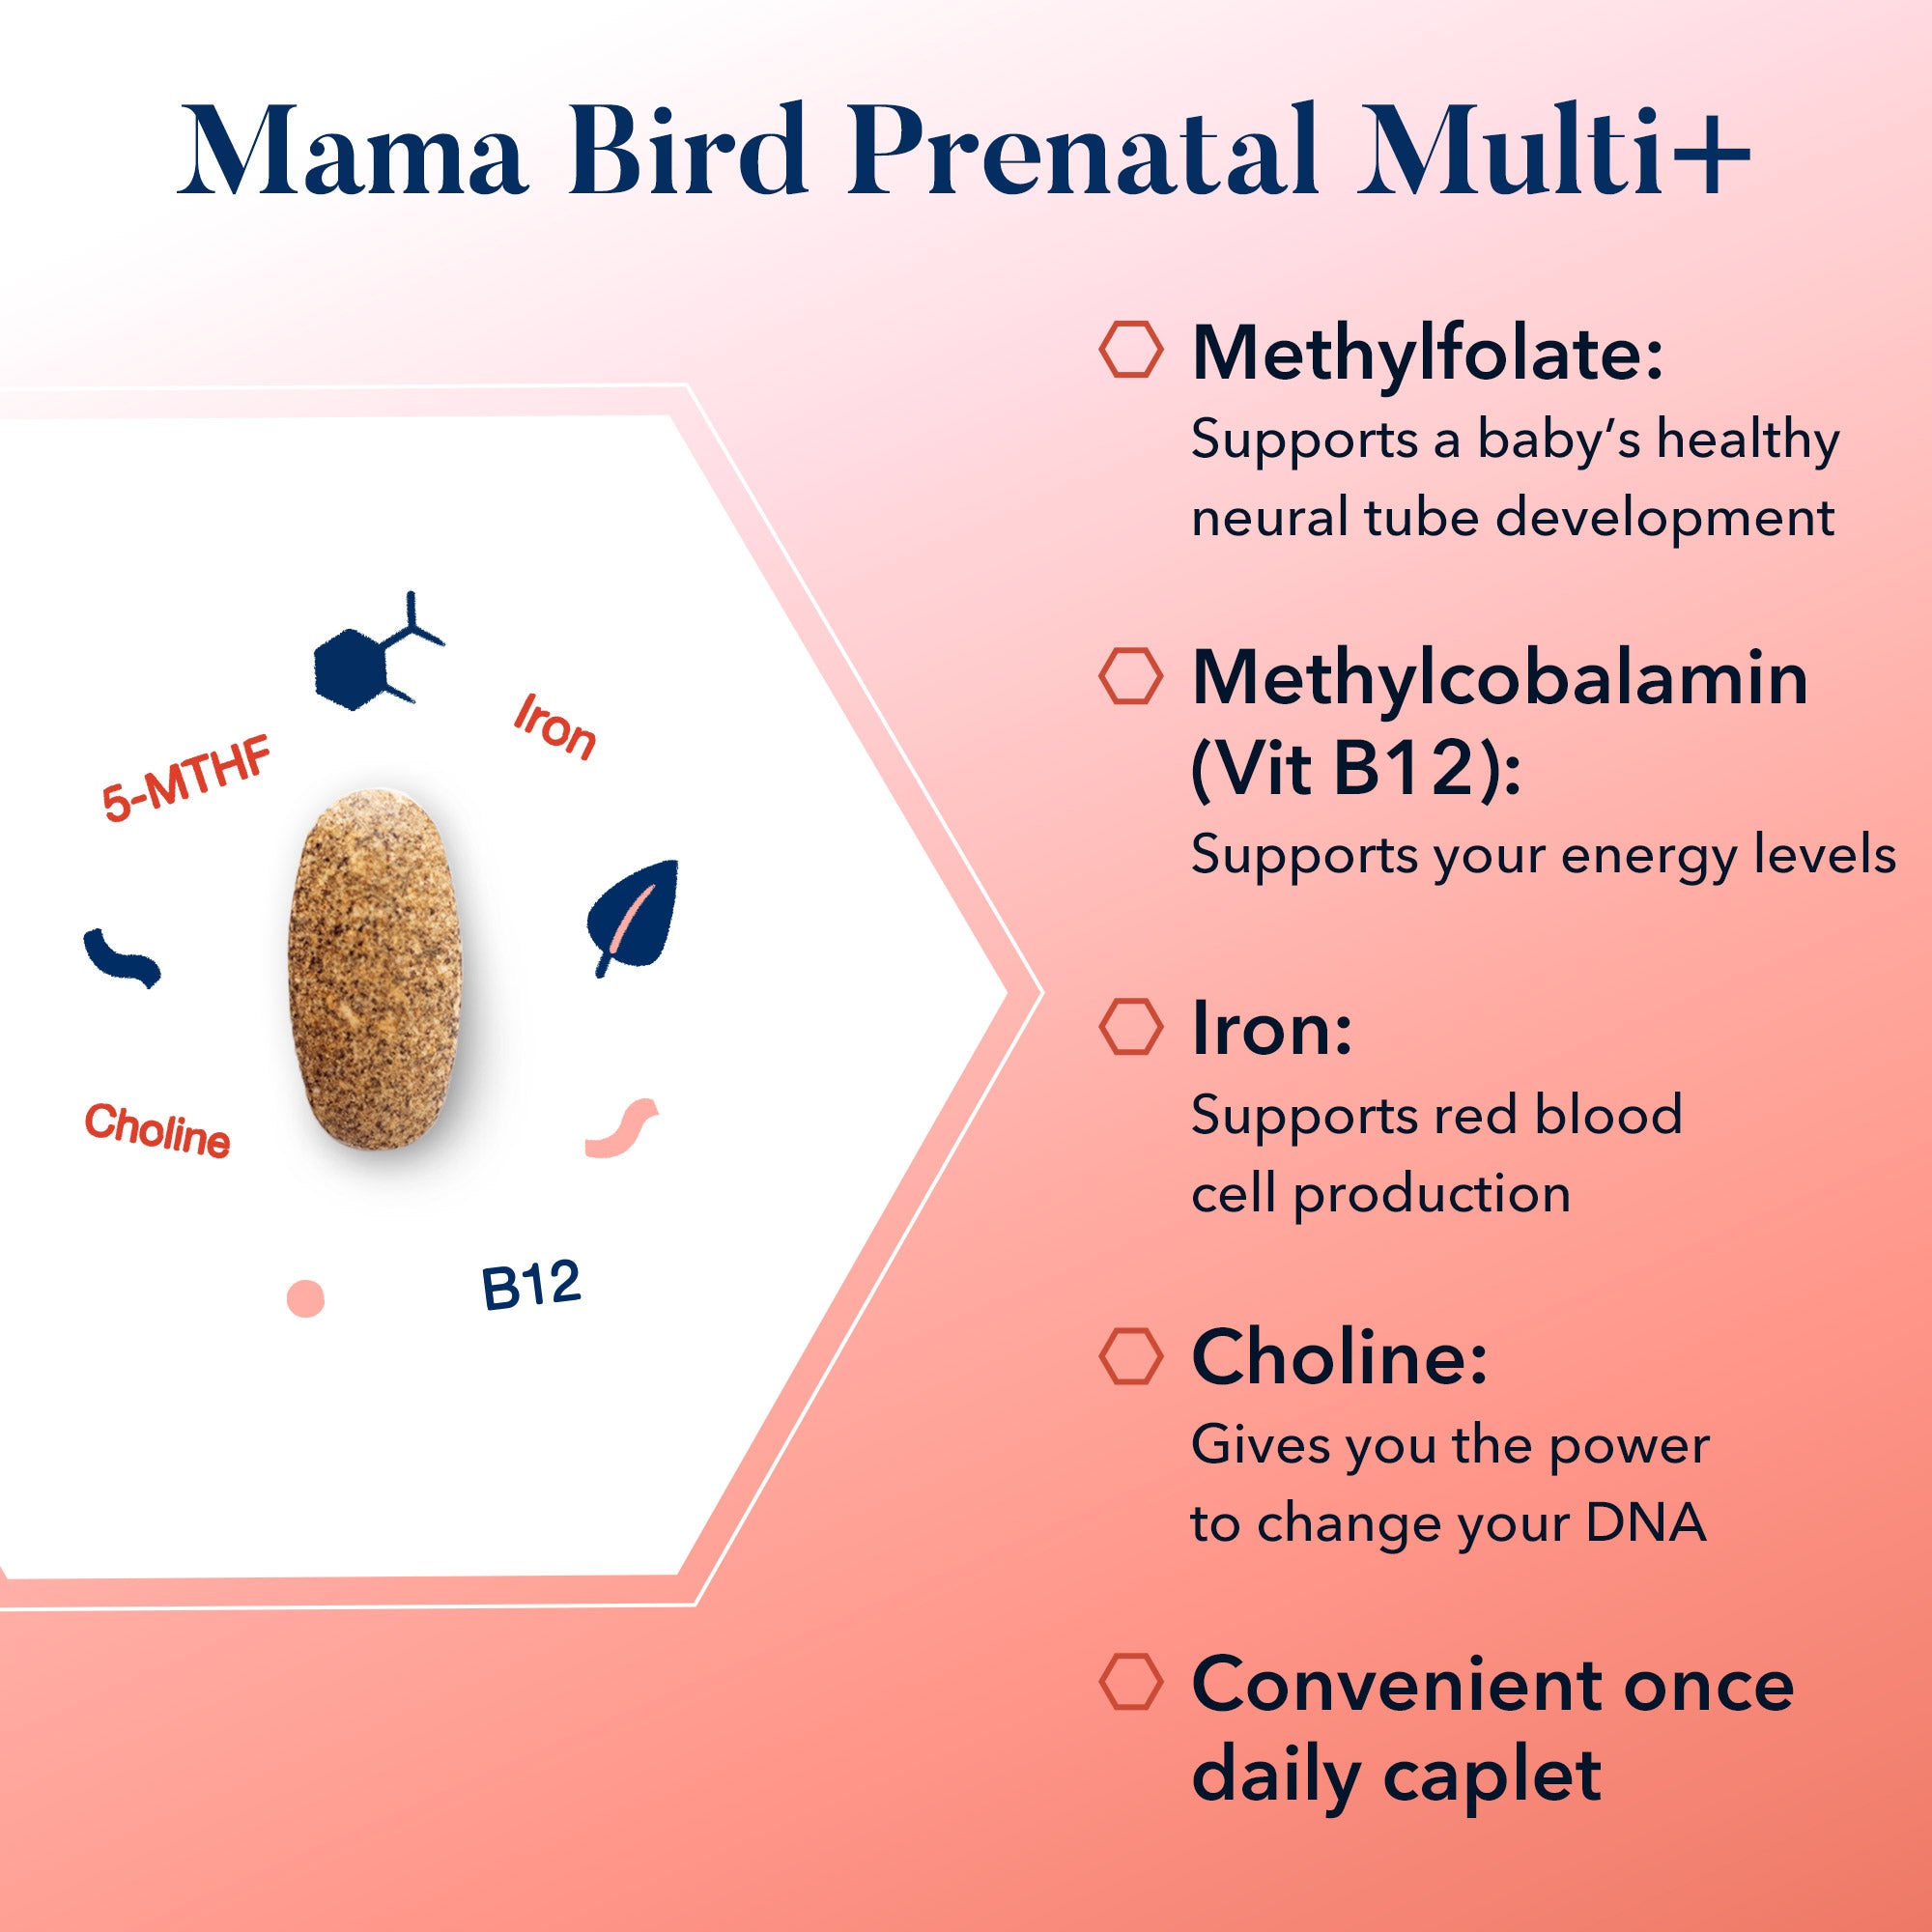 Close-up of prenatal multivitamin pill for baby's brain and neurodevelopment.